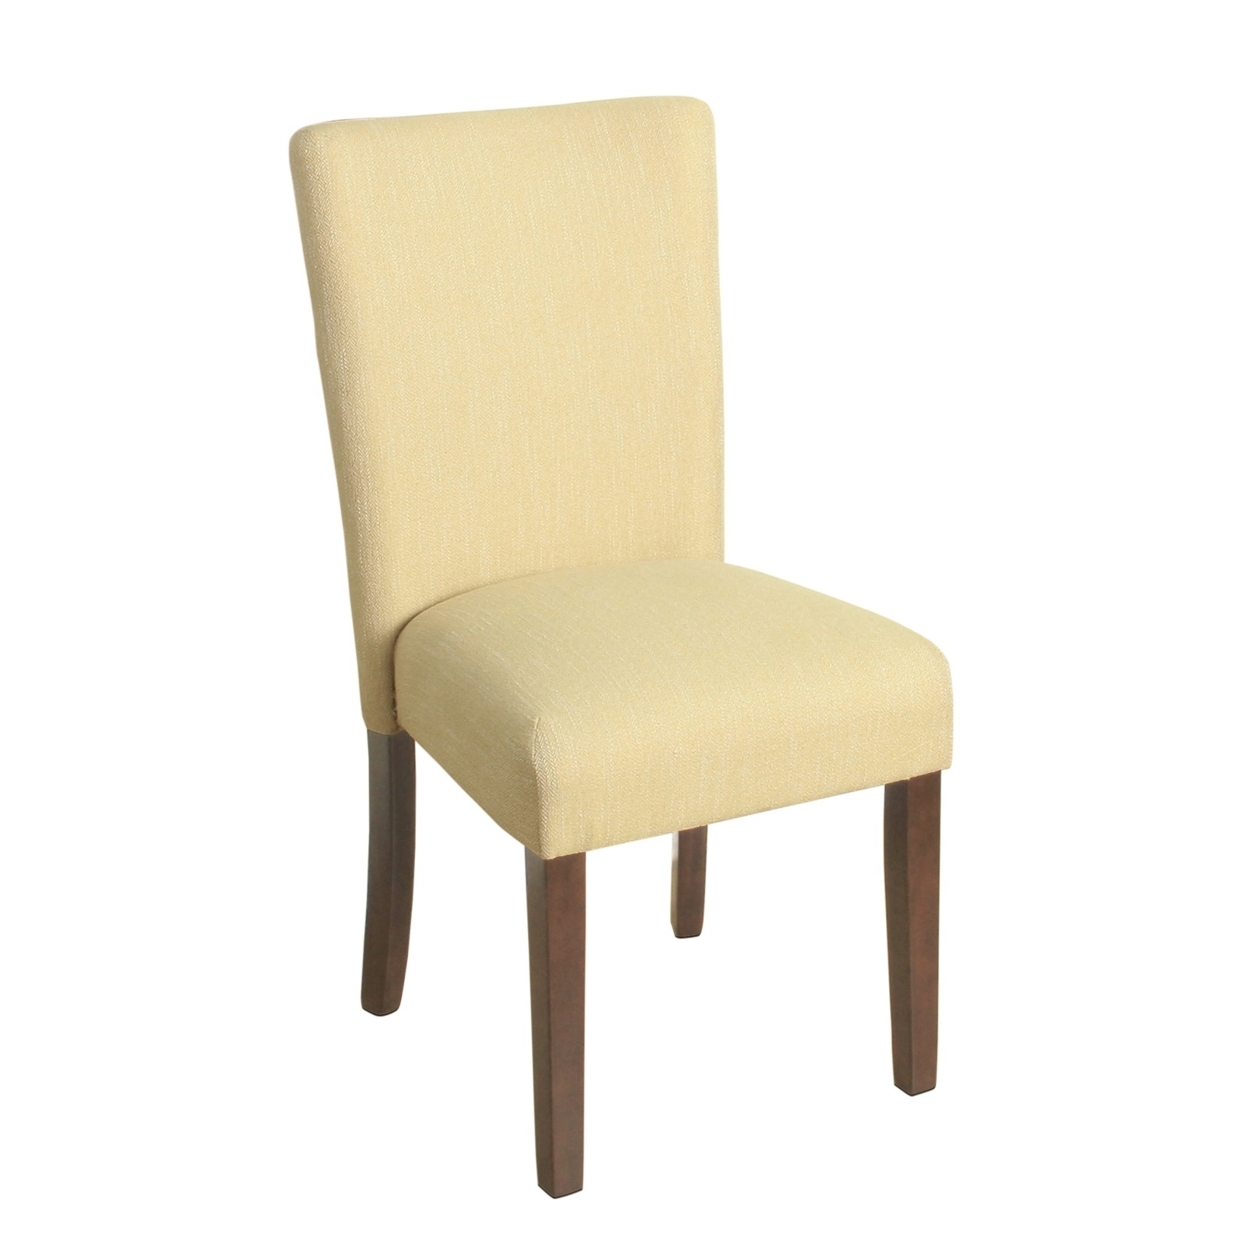 Fabric Upholstered Wooden Parson Dining Chair With Splayed Back, Yellow And Brown- Saltoro Sherpi